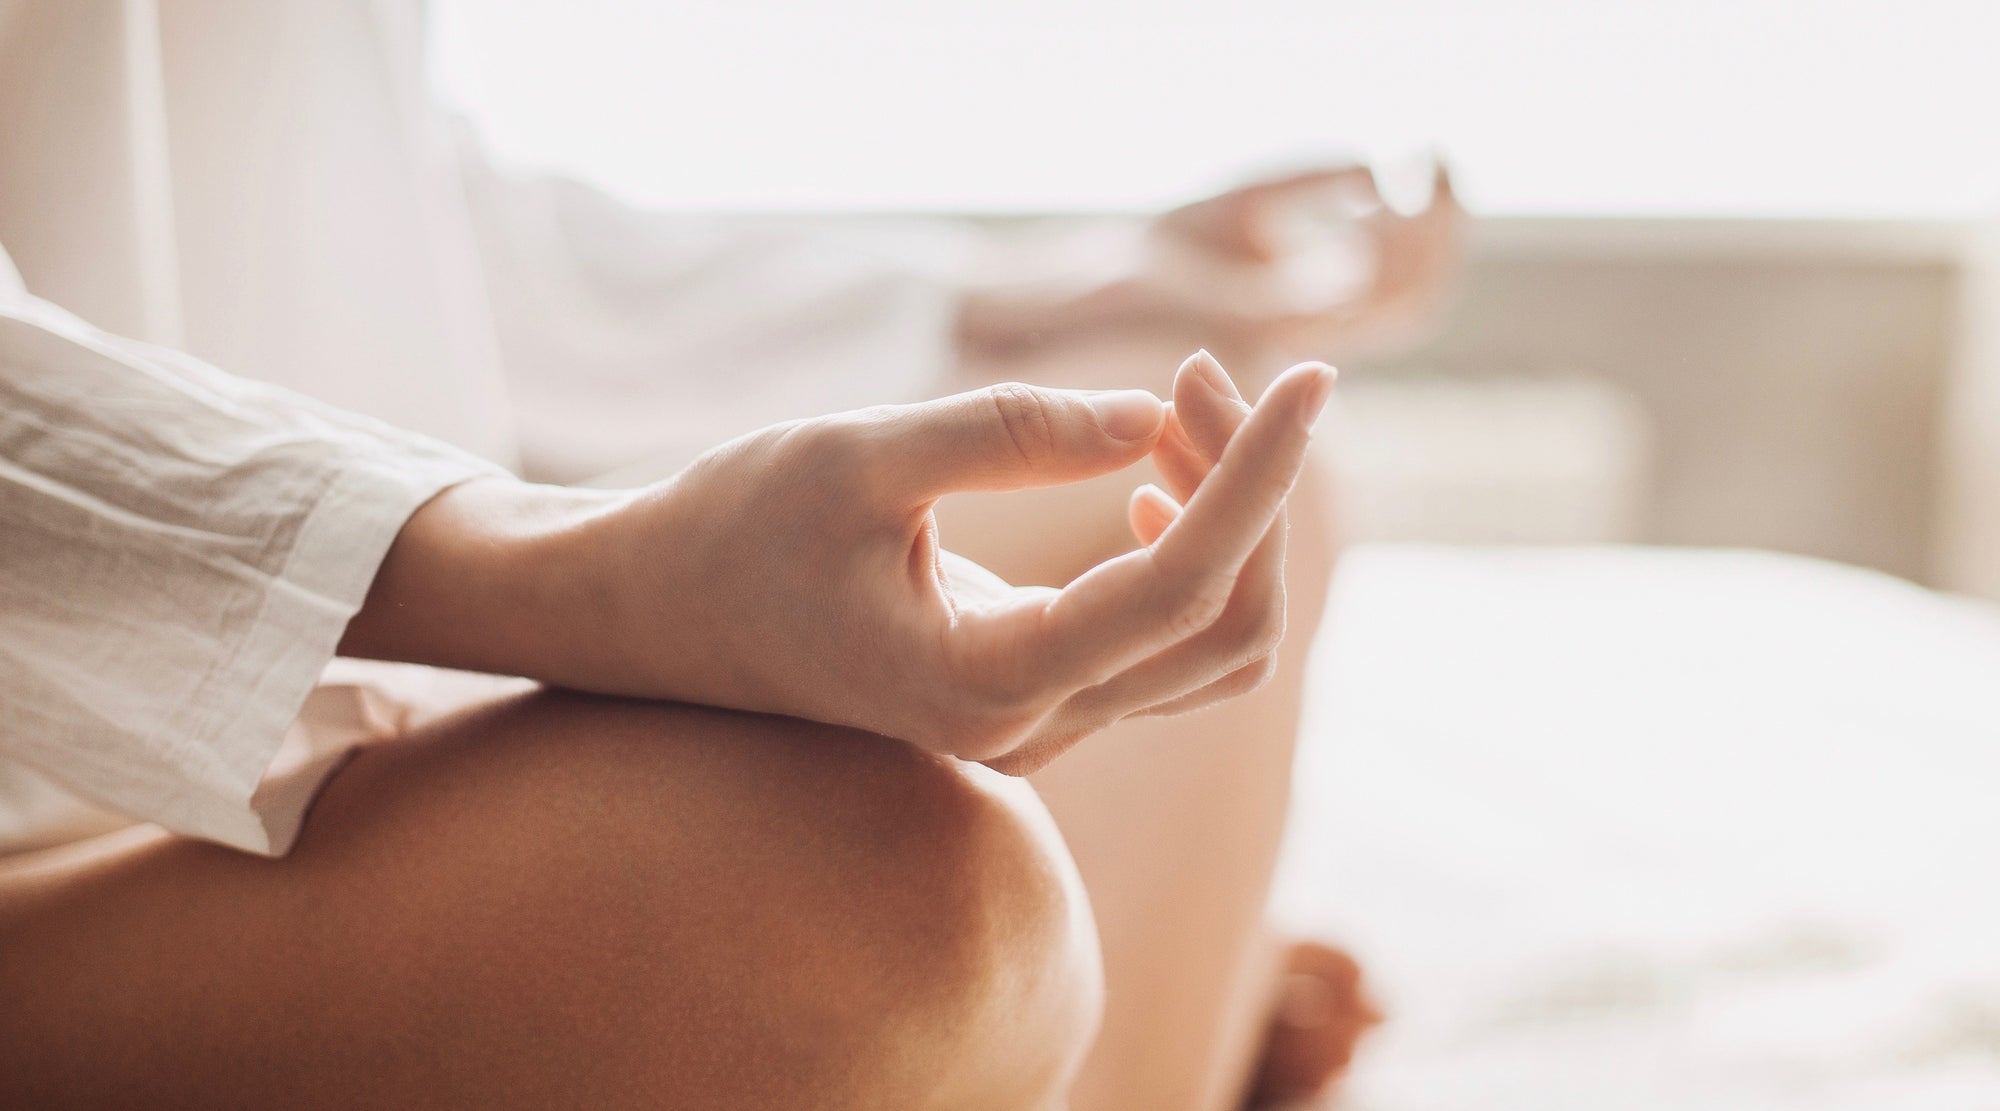 12 Tips to Start Your Daily Meditation Practice